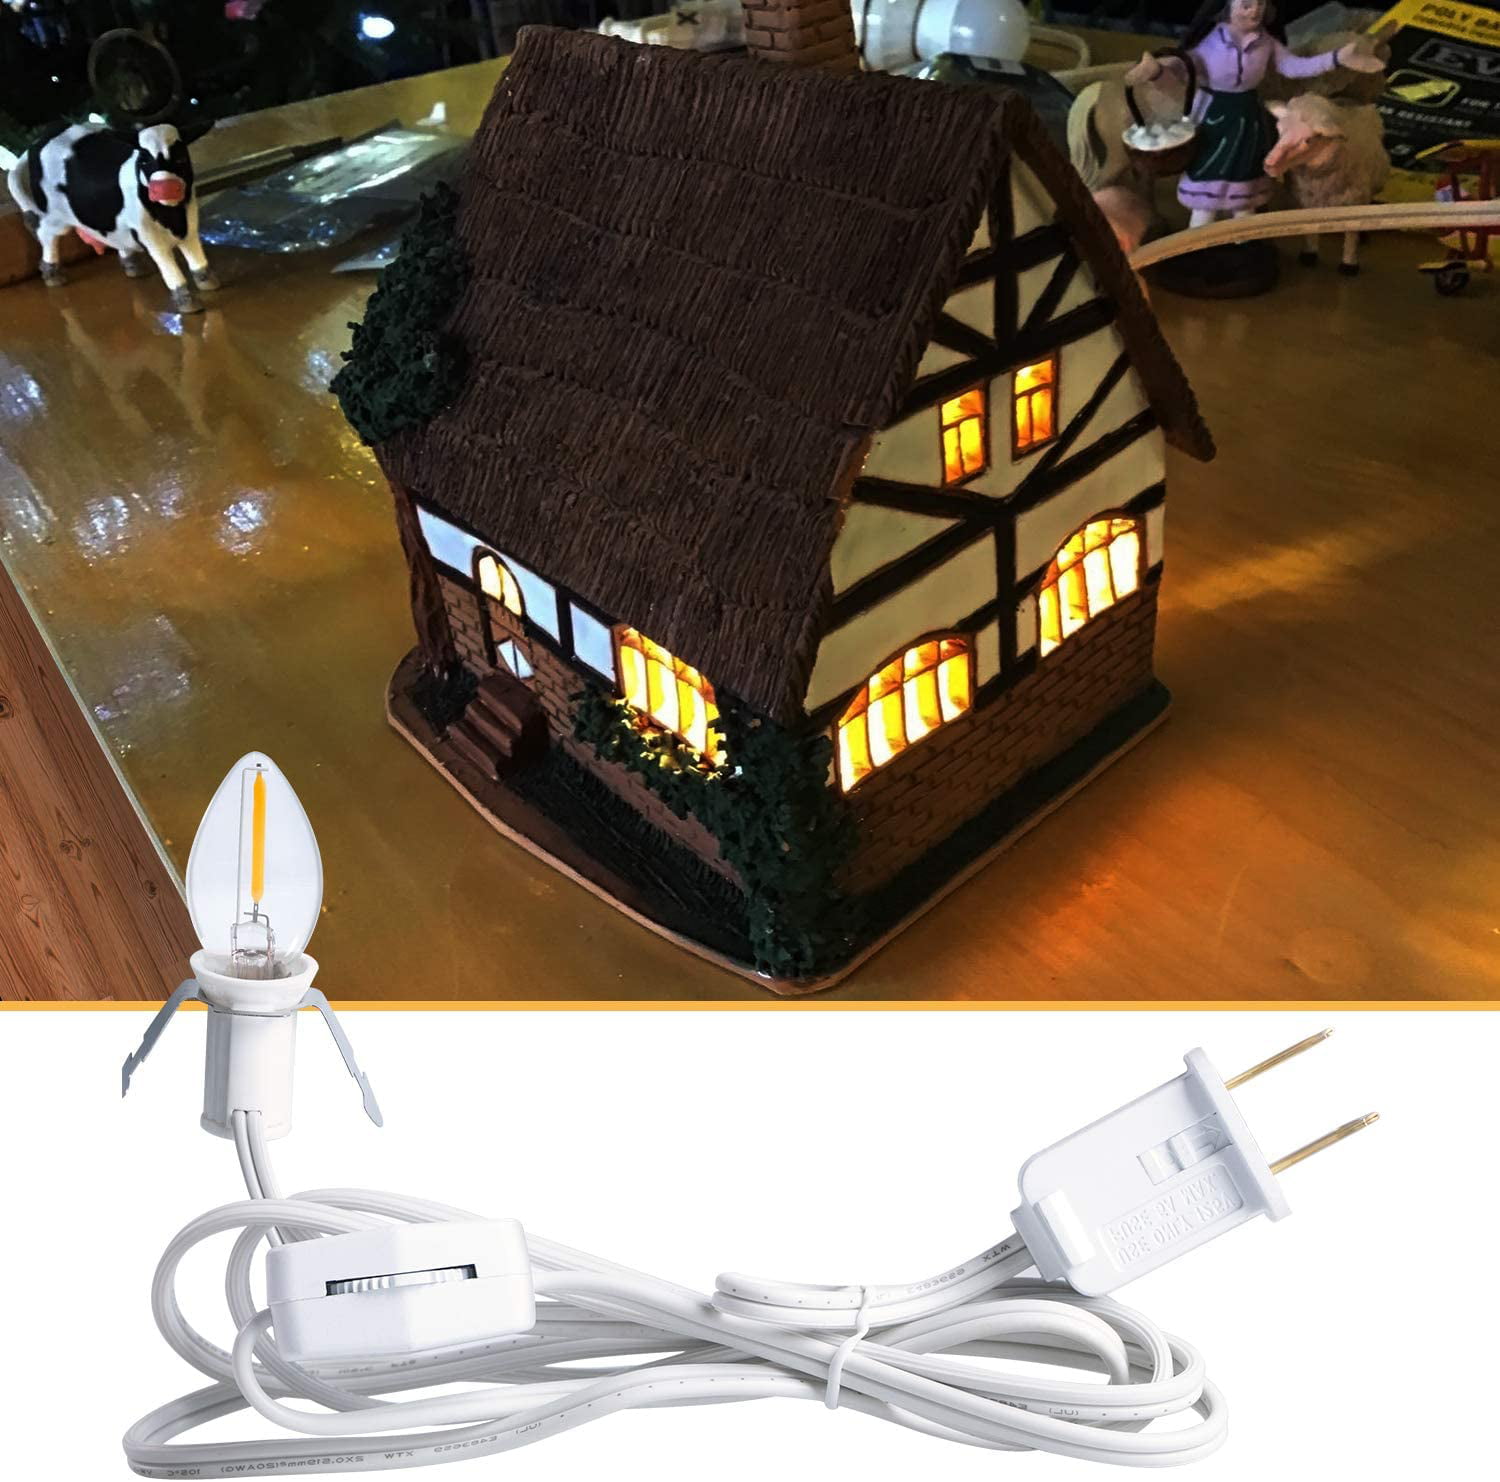 6’ White Cord with On/Off Switch Plugs Accessory Cord with One Bulb Light 